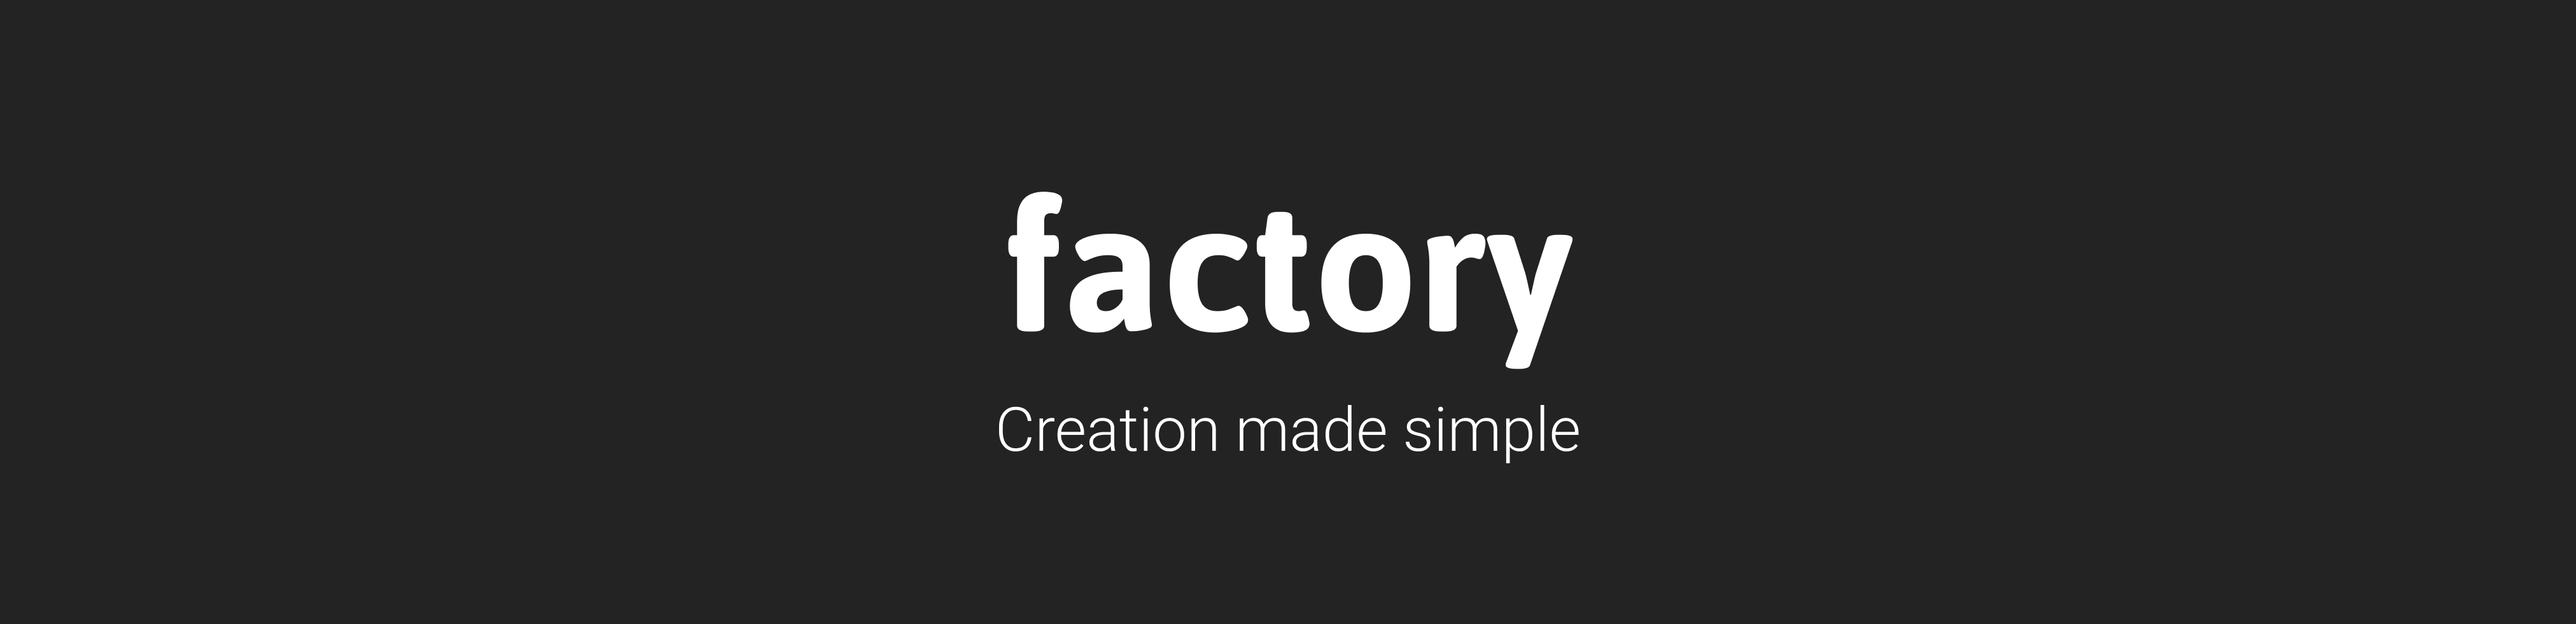 Factory title image